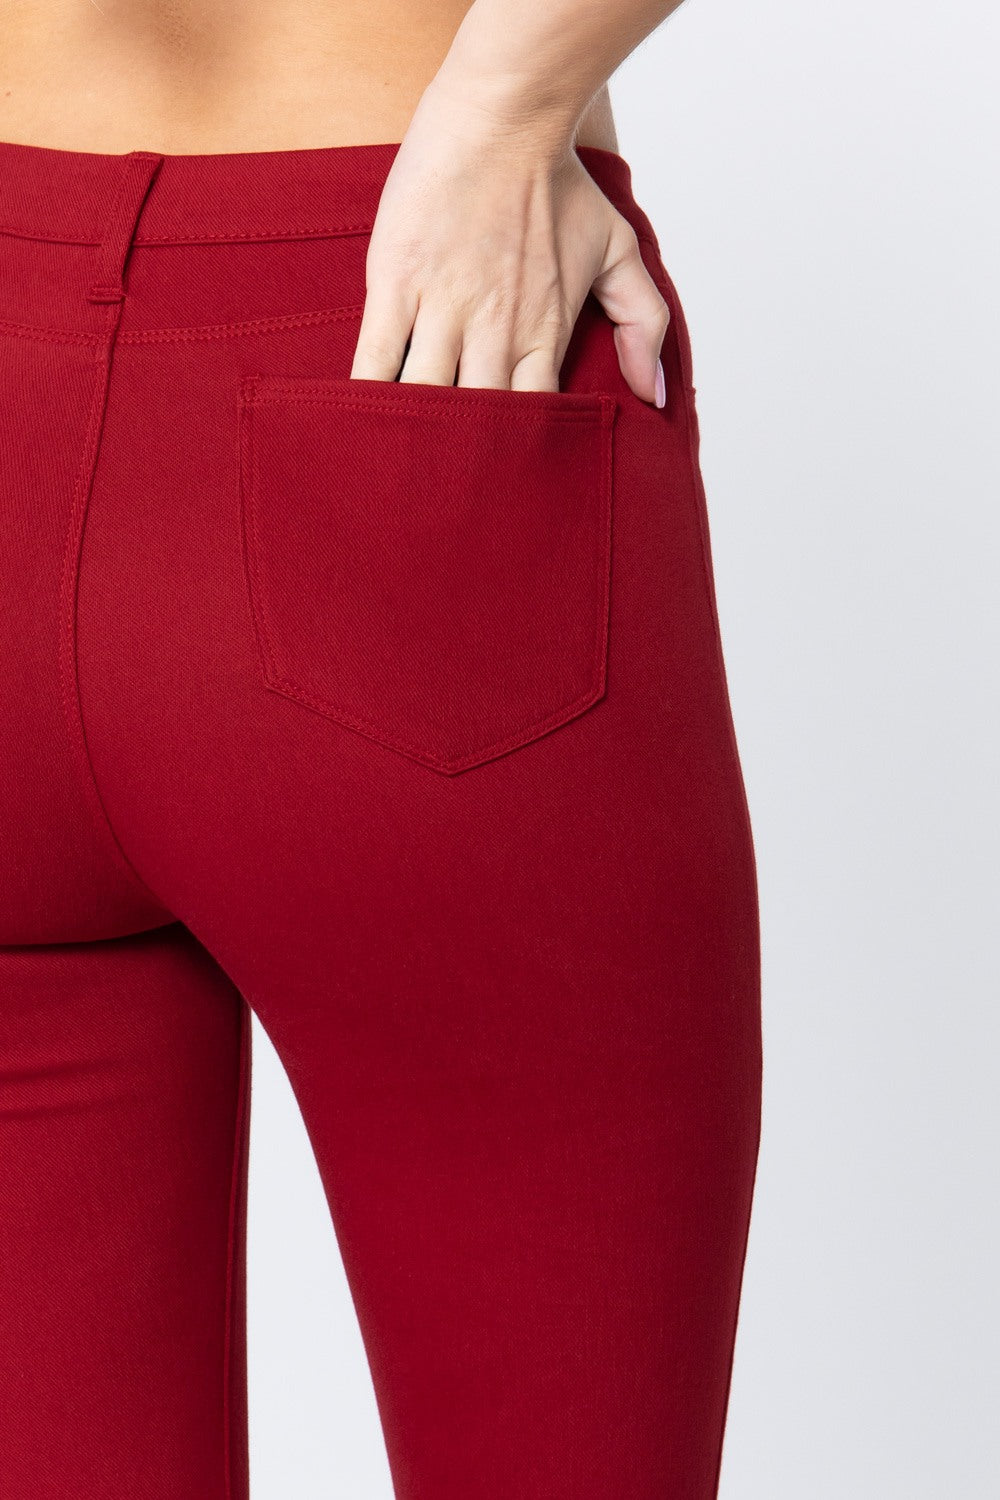 Premium Stretch Soft High Waisted Jeggings